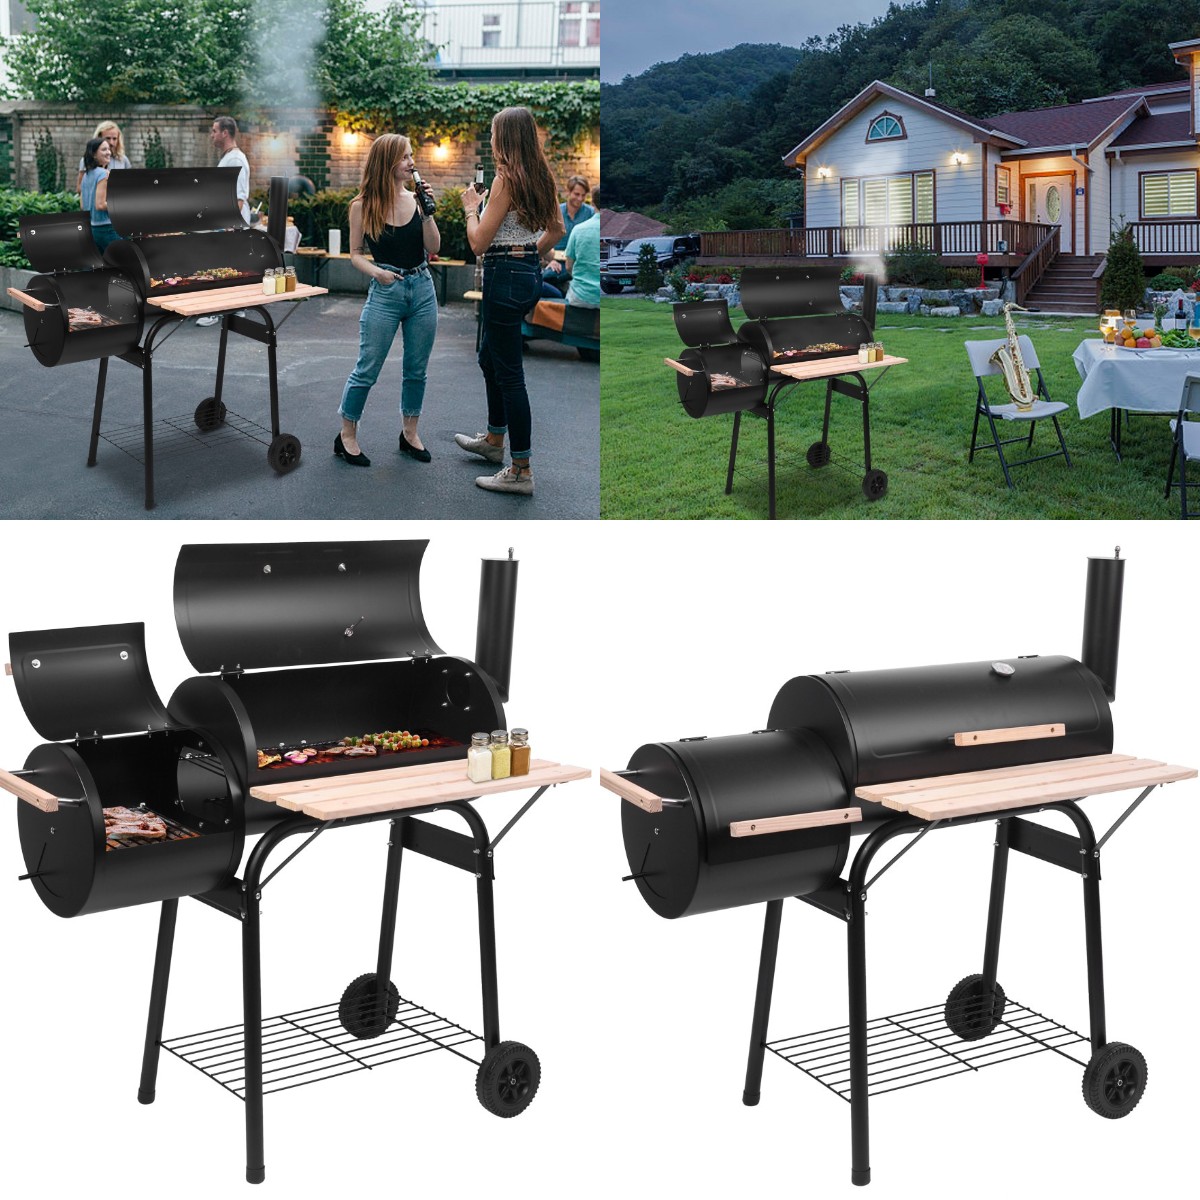 [On Sale] Goorabbit Barbecue Grill,Charcoal Grill On Sale,Barbecue Grill,Charcoal Grill On Sale,Charcoal BBQ Grill 24.4" L x 29.6" H Outdoor Meat Cooker Smoker Patio Backyard,Black - image 1 of 10